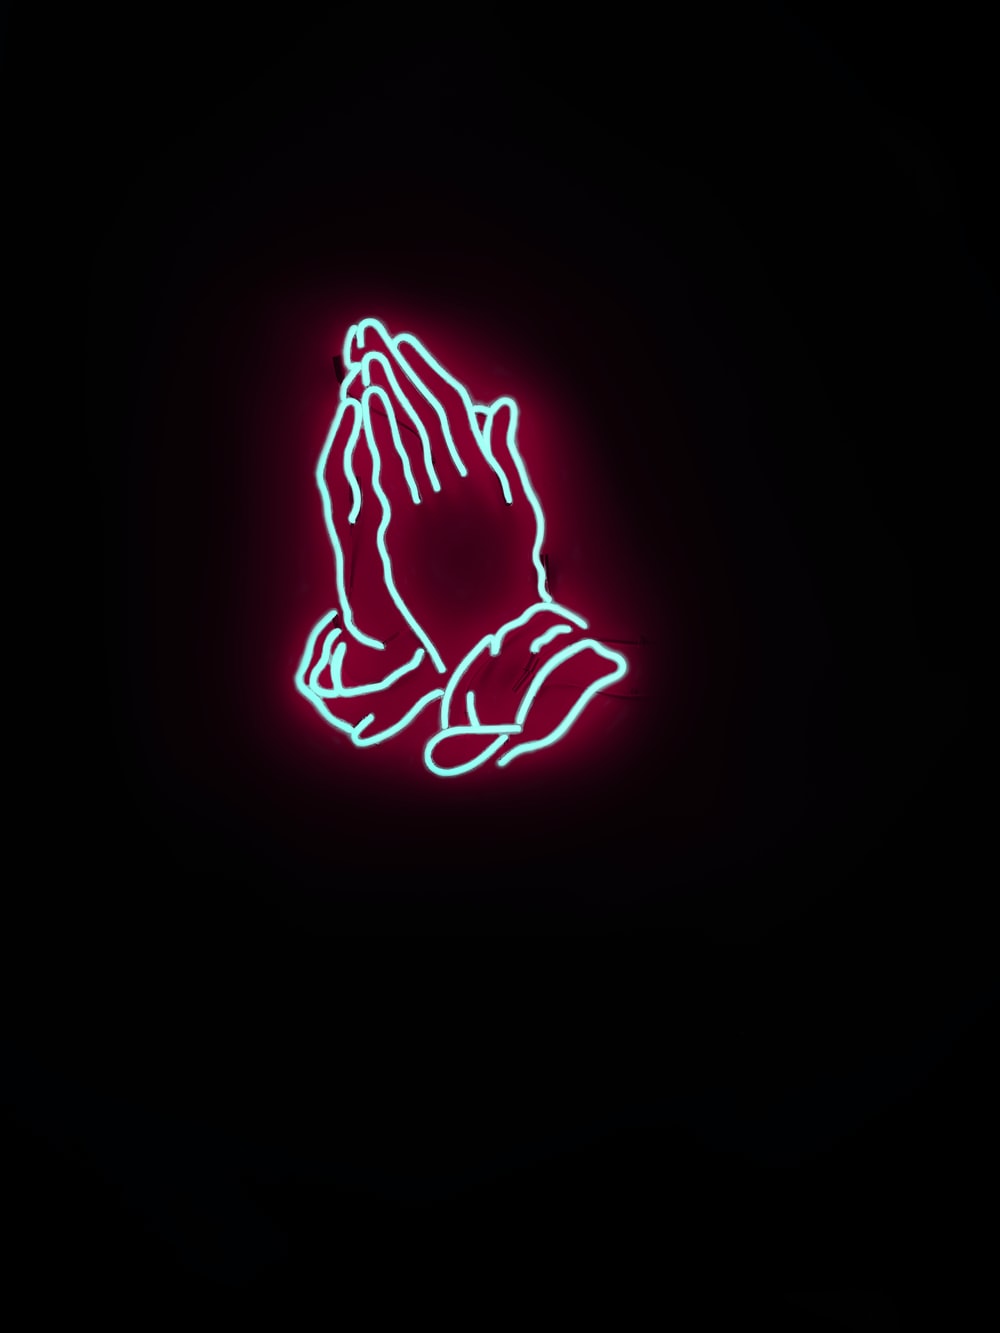 Jesus Hand Picture. Download Free Image